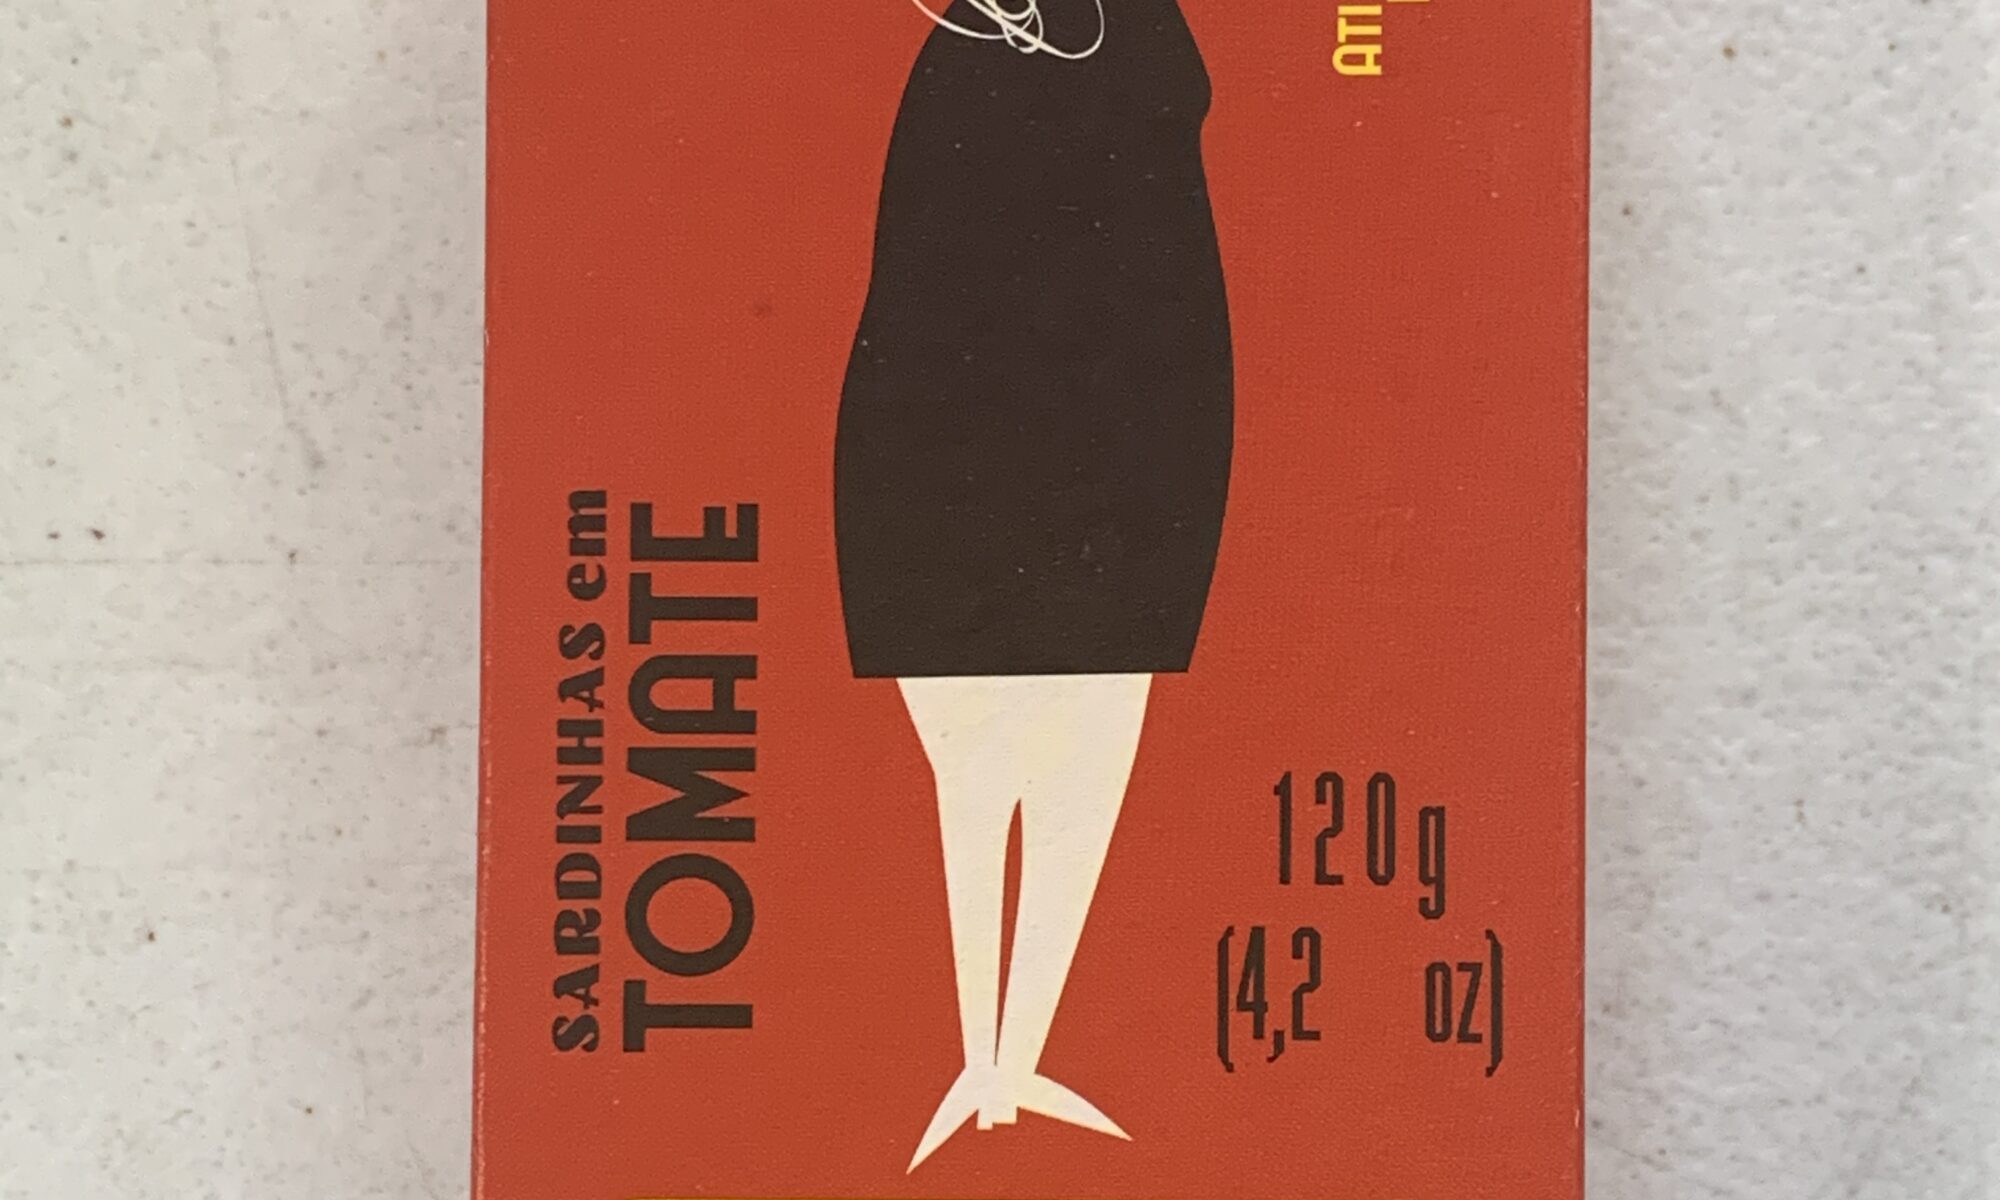 Image of the front of a package of Ati Manel Sardines in Tomato Sauce